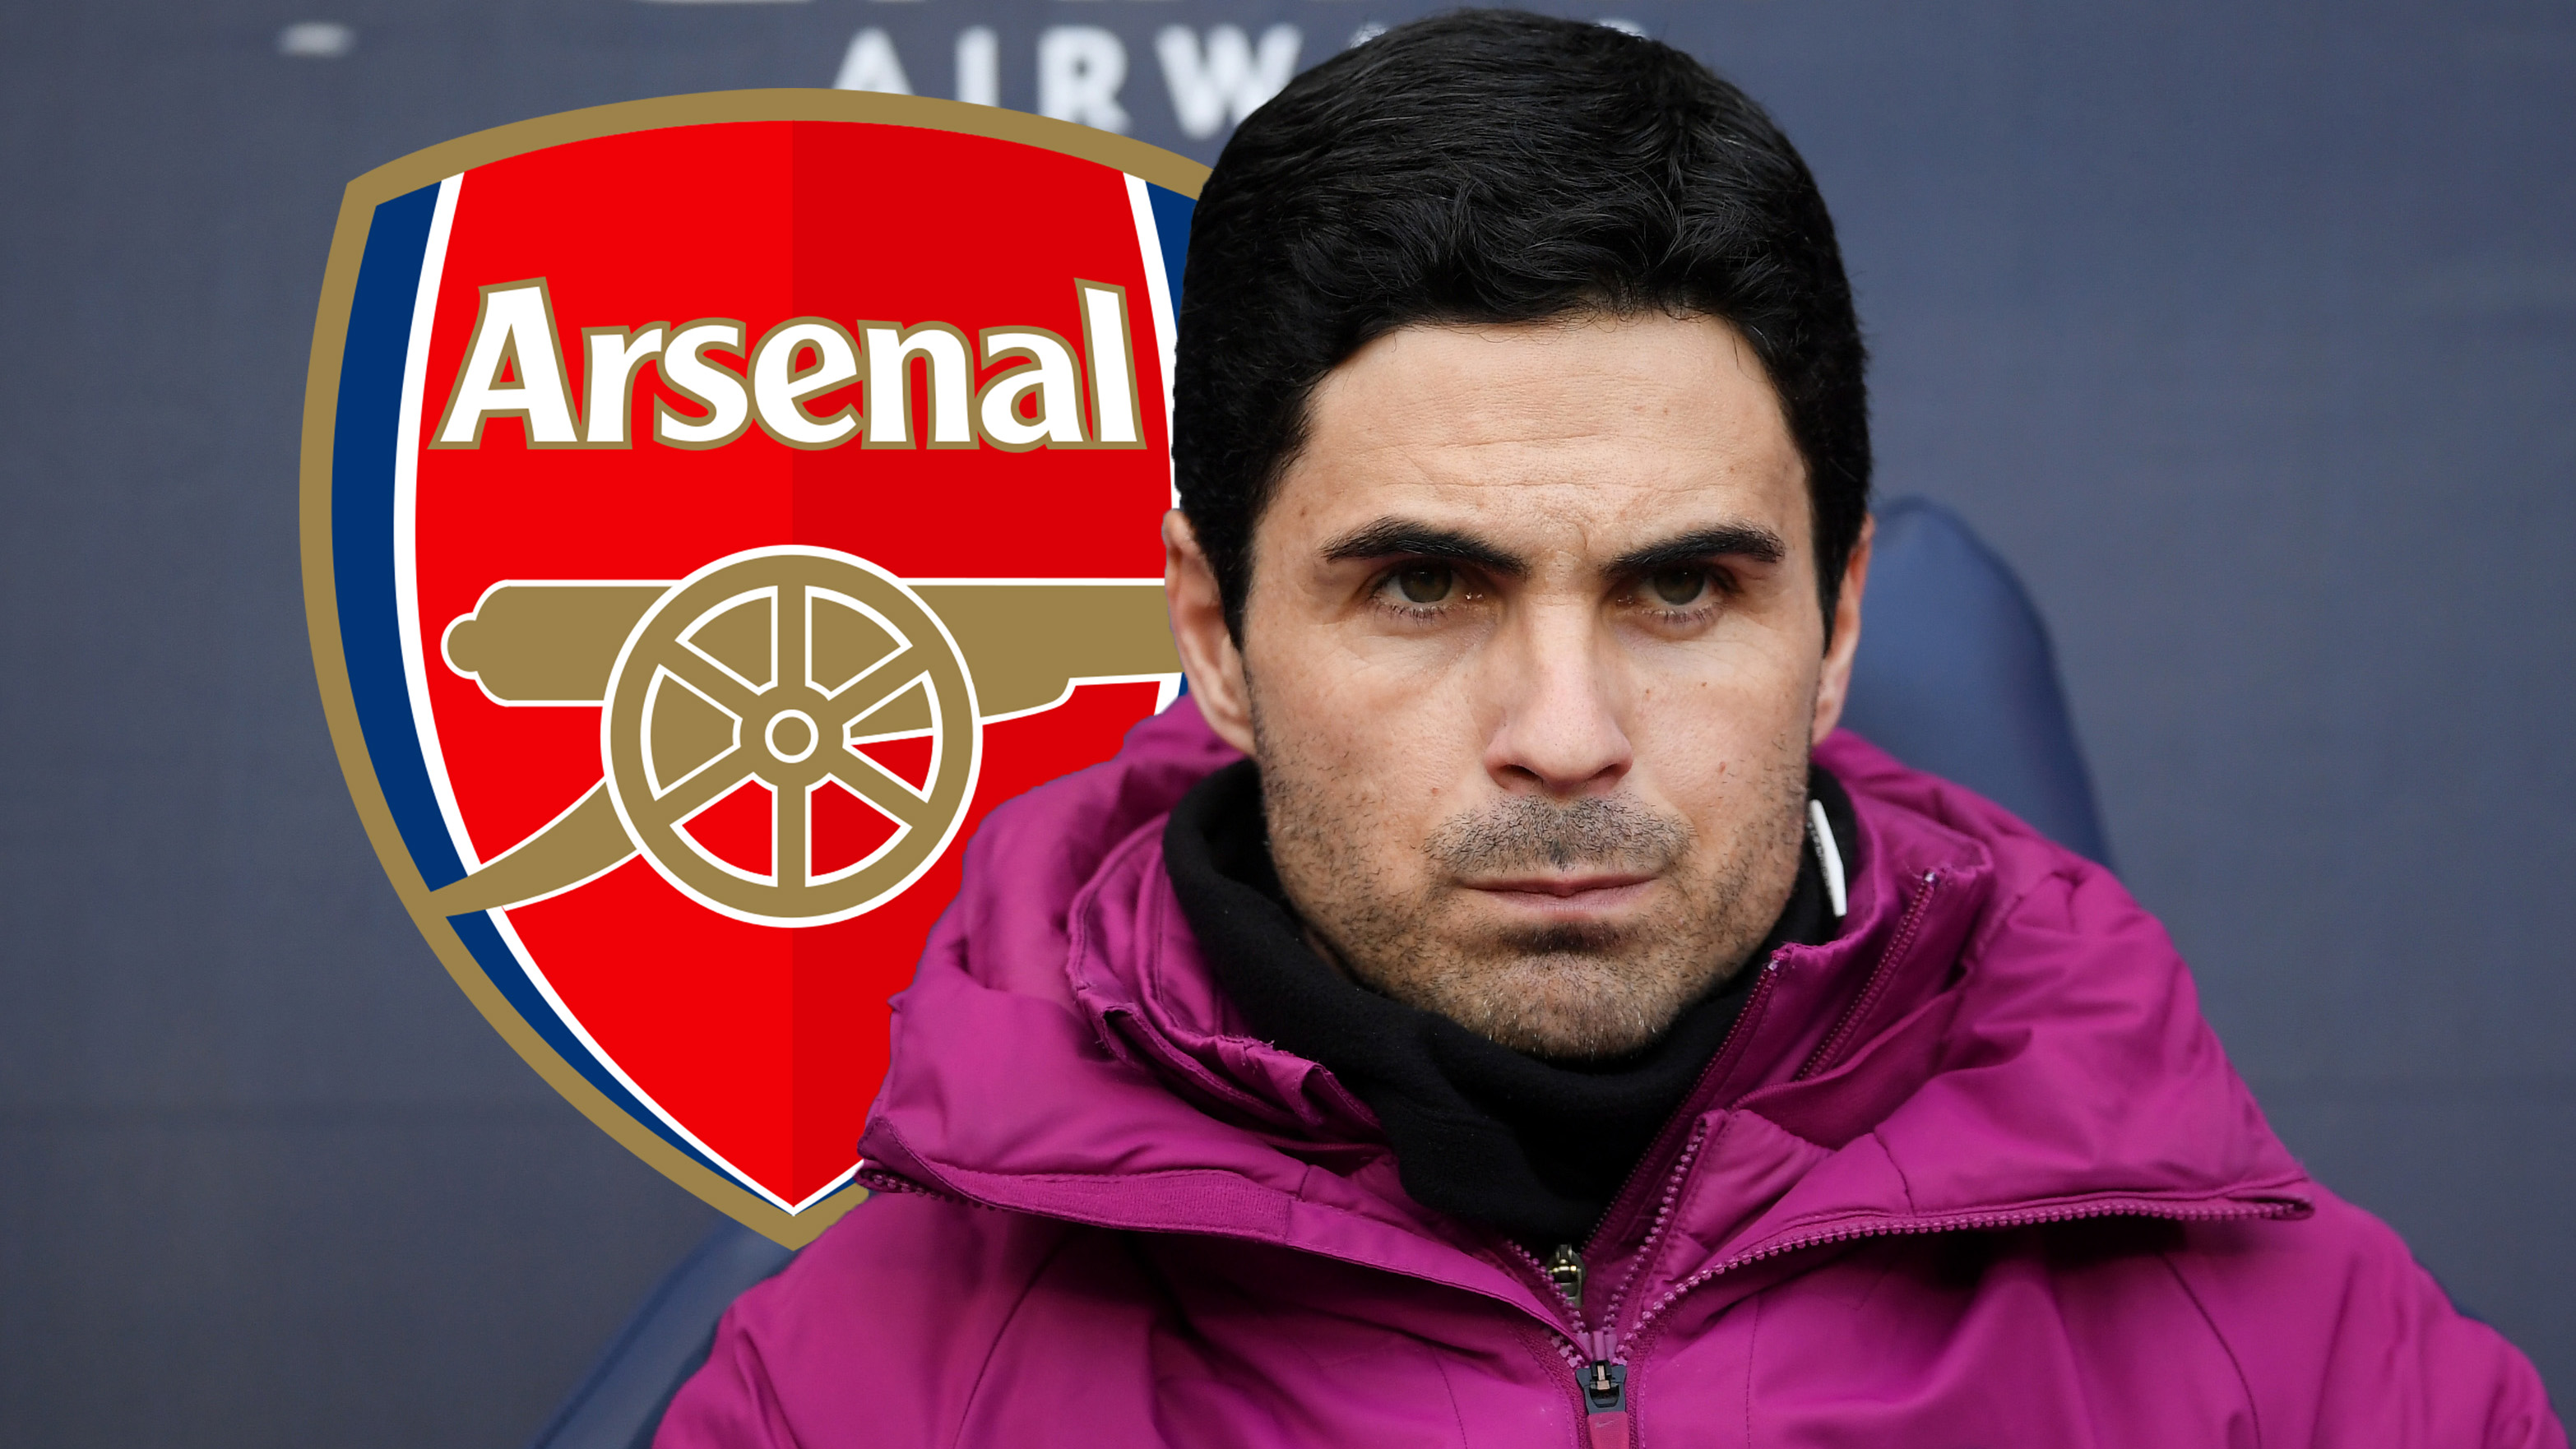 ‘Arteta will move bad influences out of Arsenal’ – Smith expecting midfield signing & end to 'car crash' defending